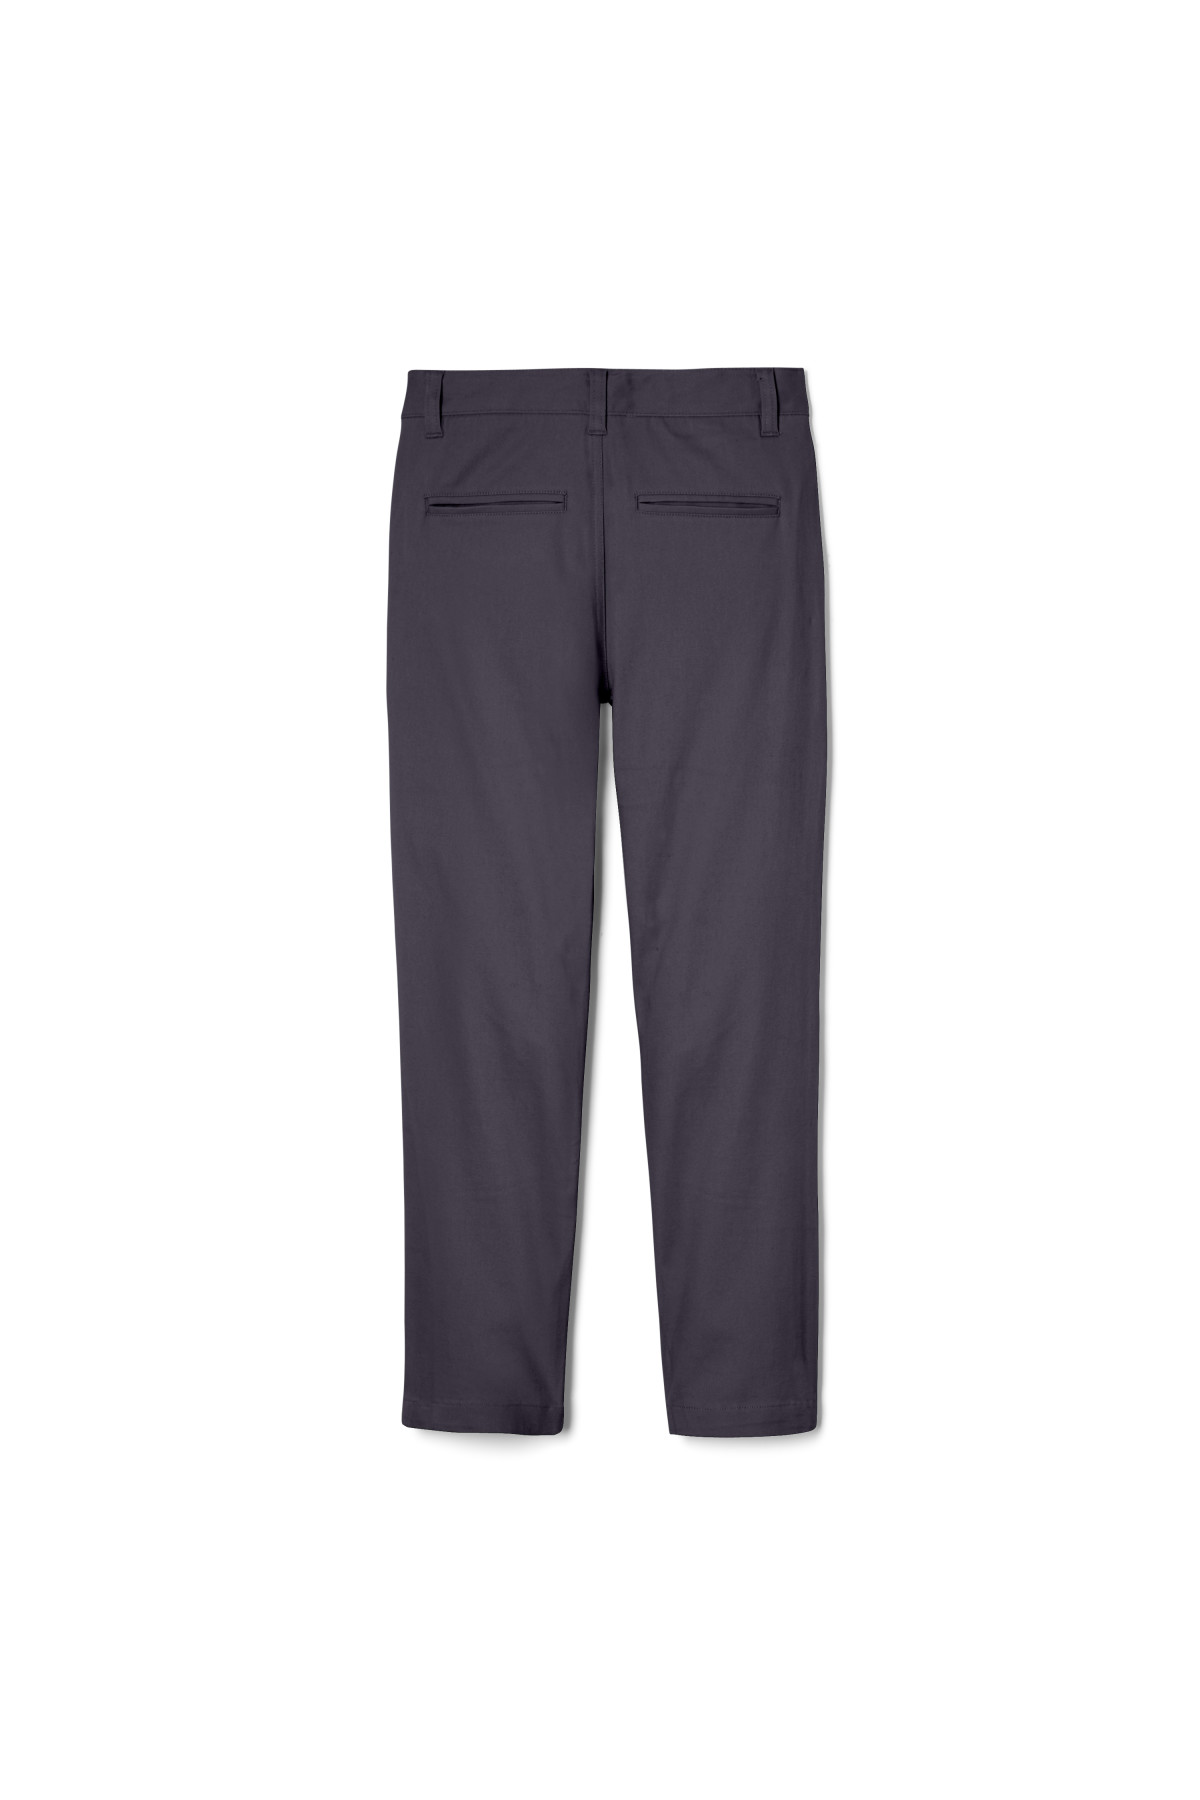 Boys' Straight Fit Stretch Twill Pant - French Toast